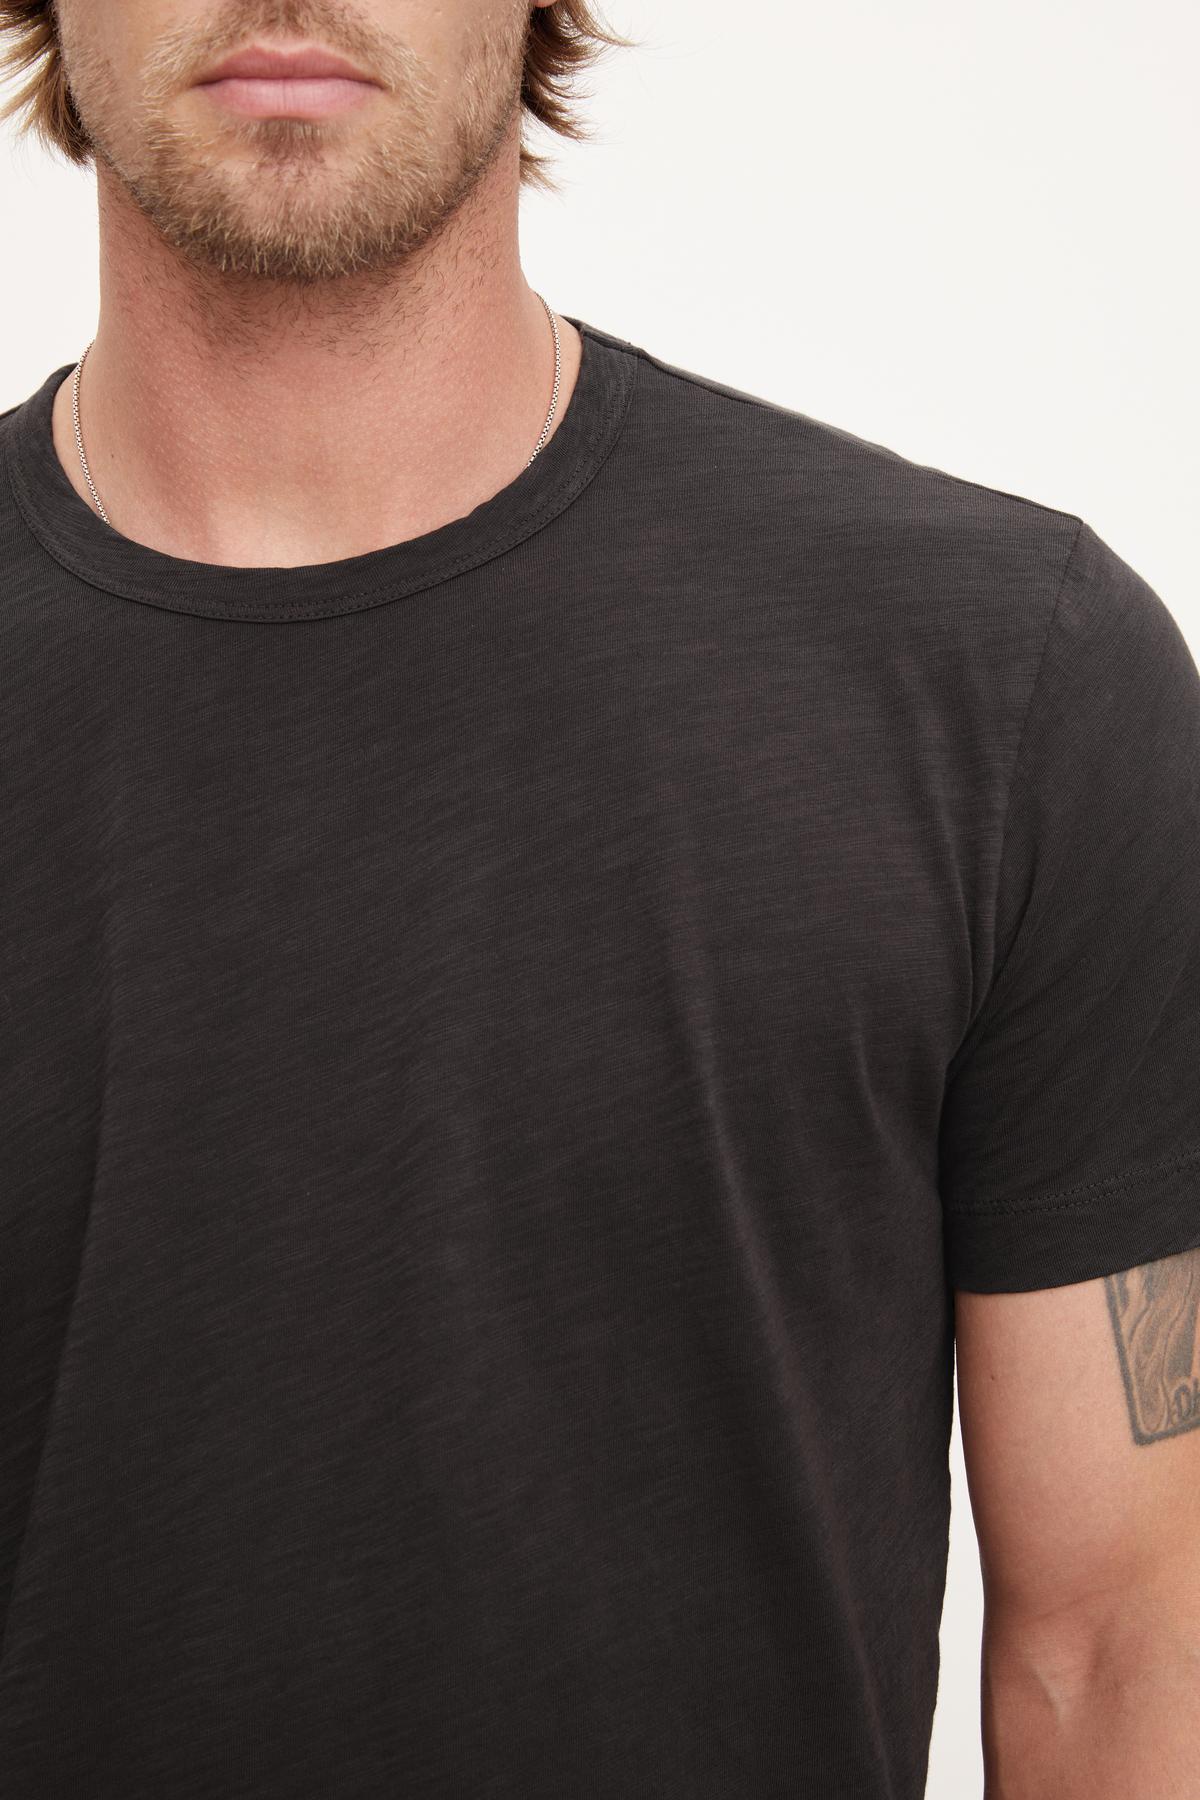 A man wearing a black crew neck Velvet by Graham & Spencer AMARO TEE with a visible tattoo on his left arm.-36299660198081